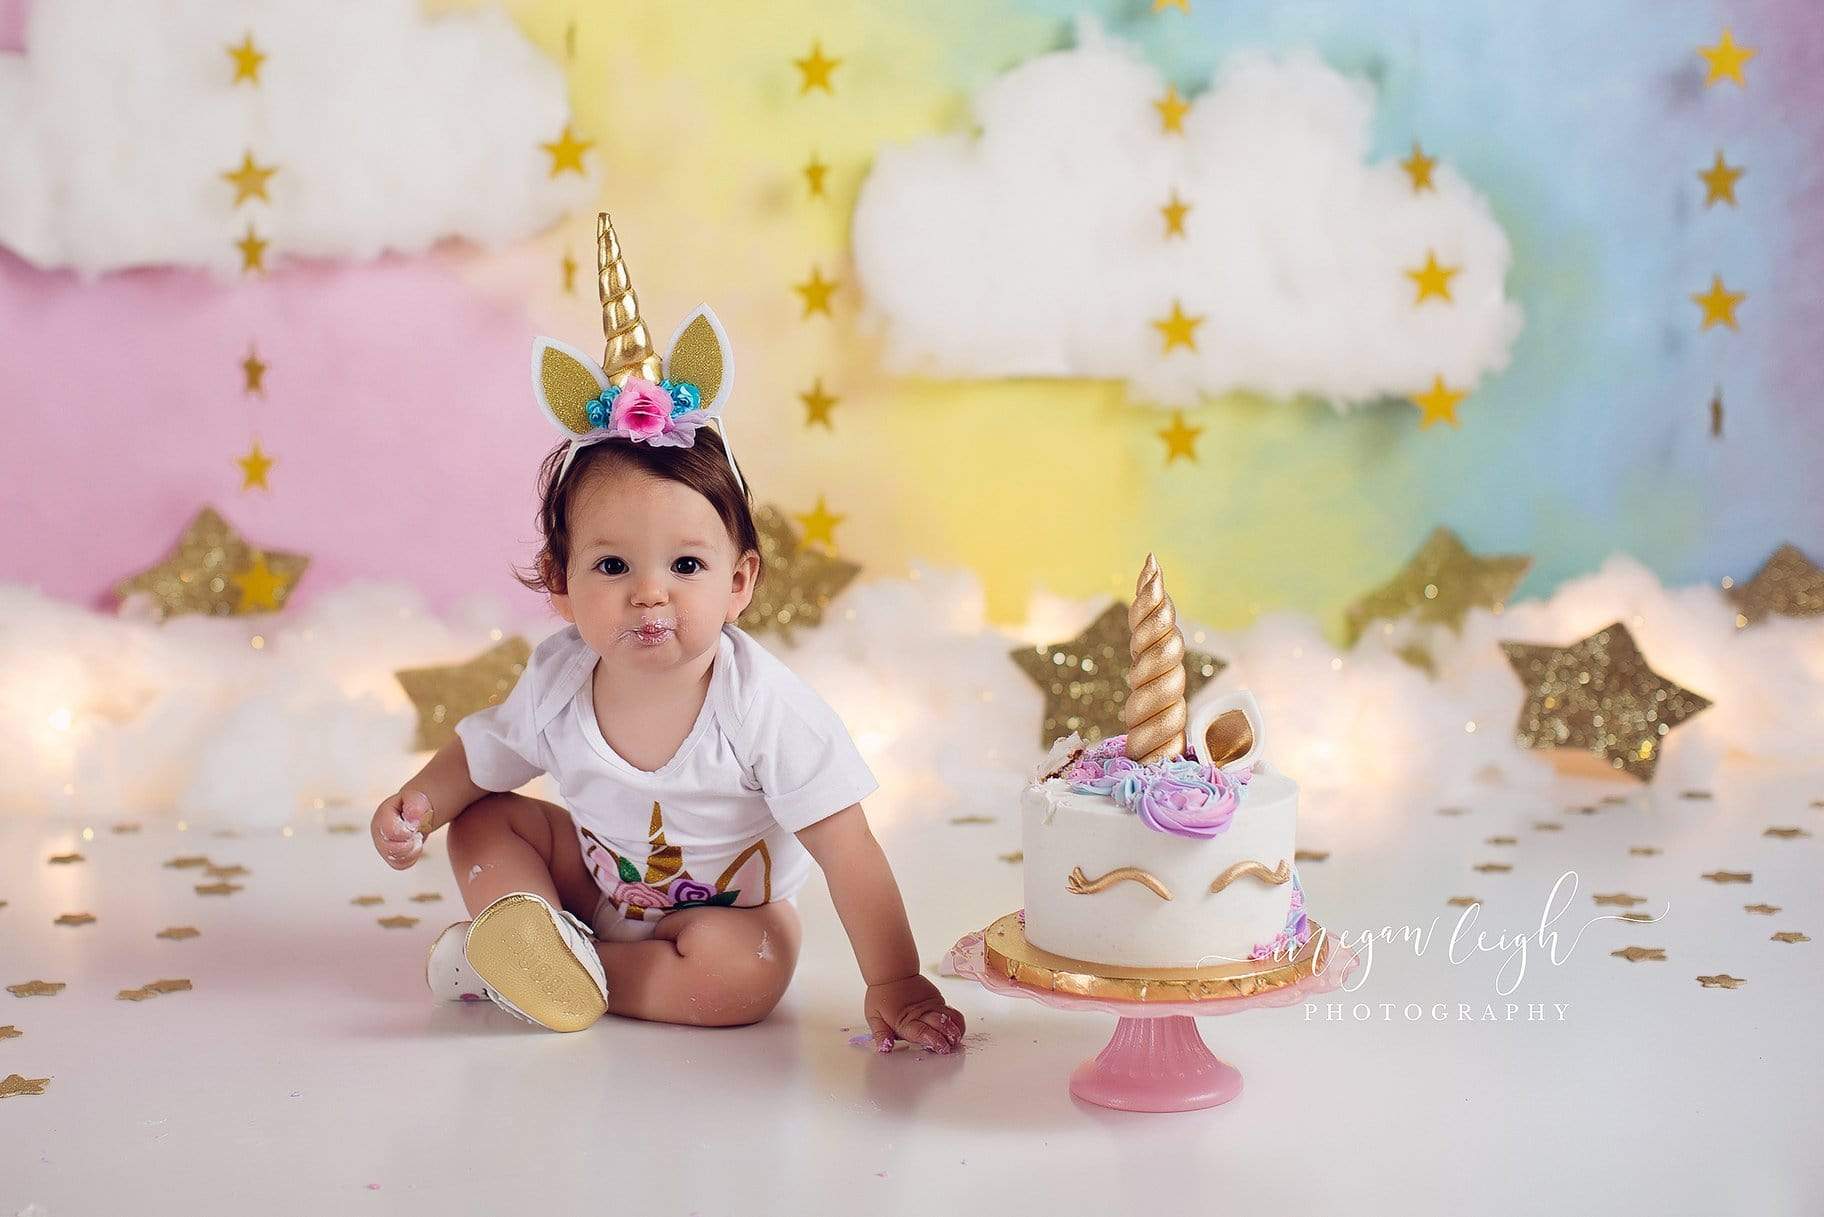 Kate Fantasy Background with Clouds Stars Children Backdrop for Photography Designed by Megan Leigh Photography